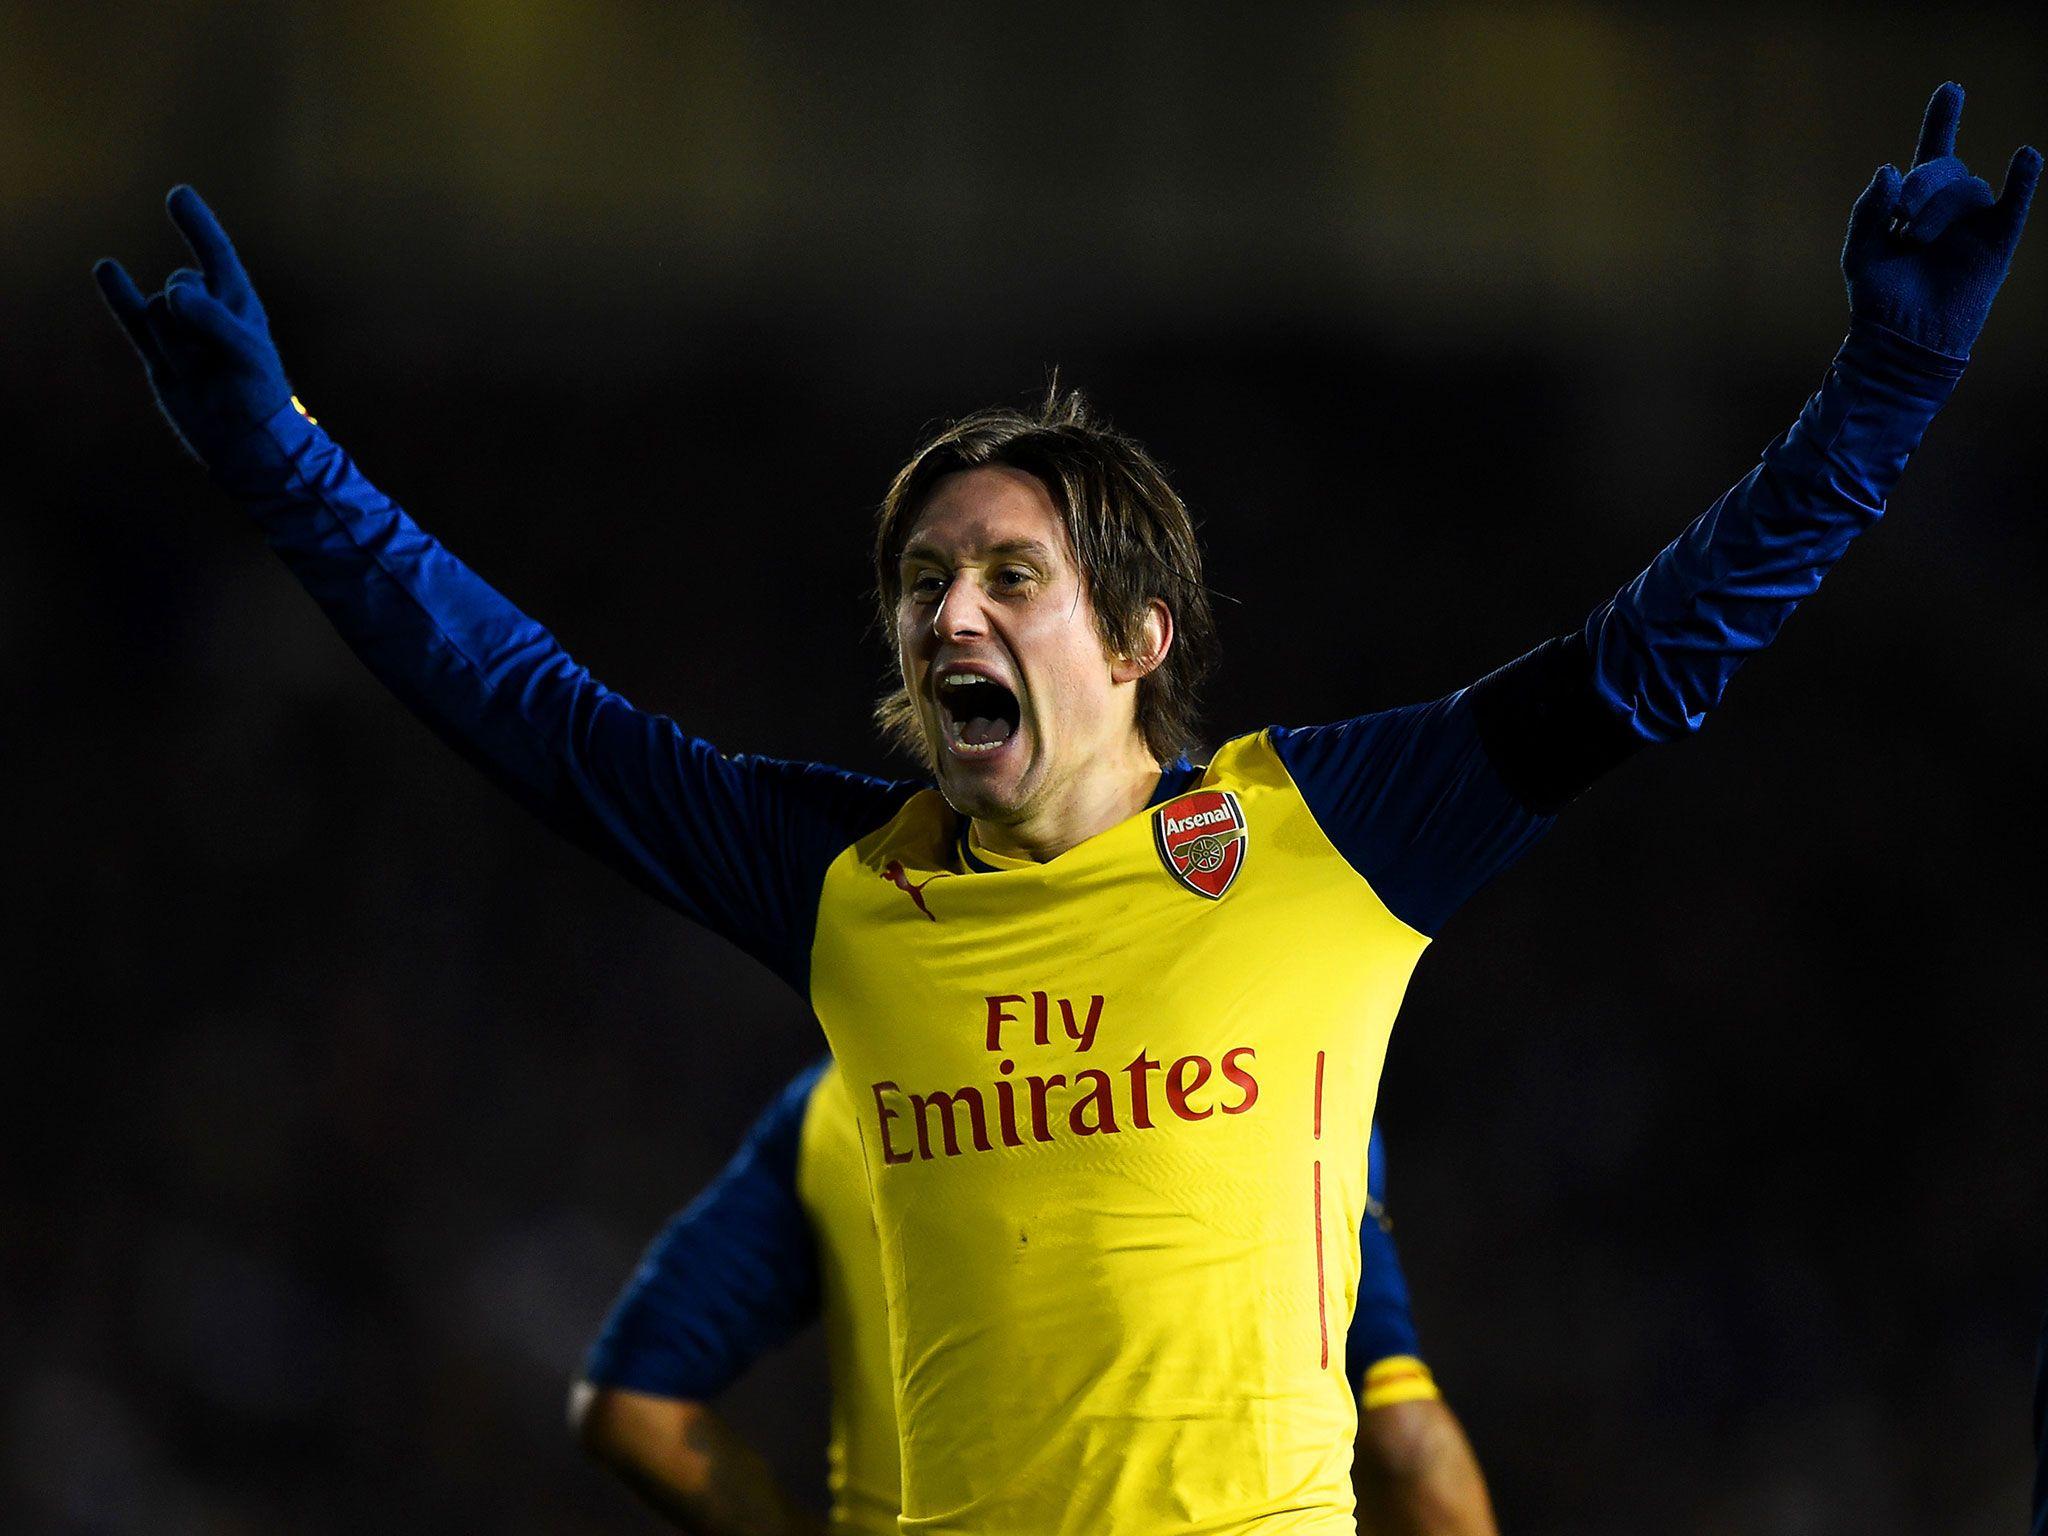 Emotional: Tomas Rosicky sends a final message to the Arsenal fans